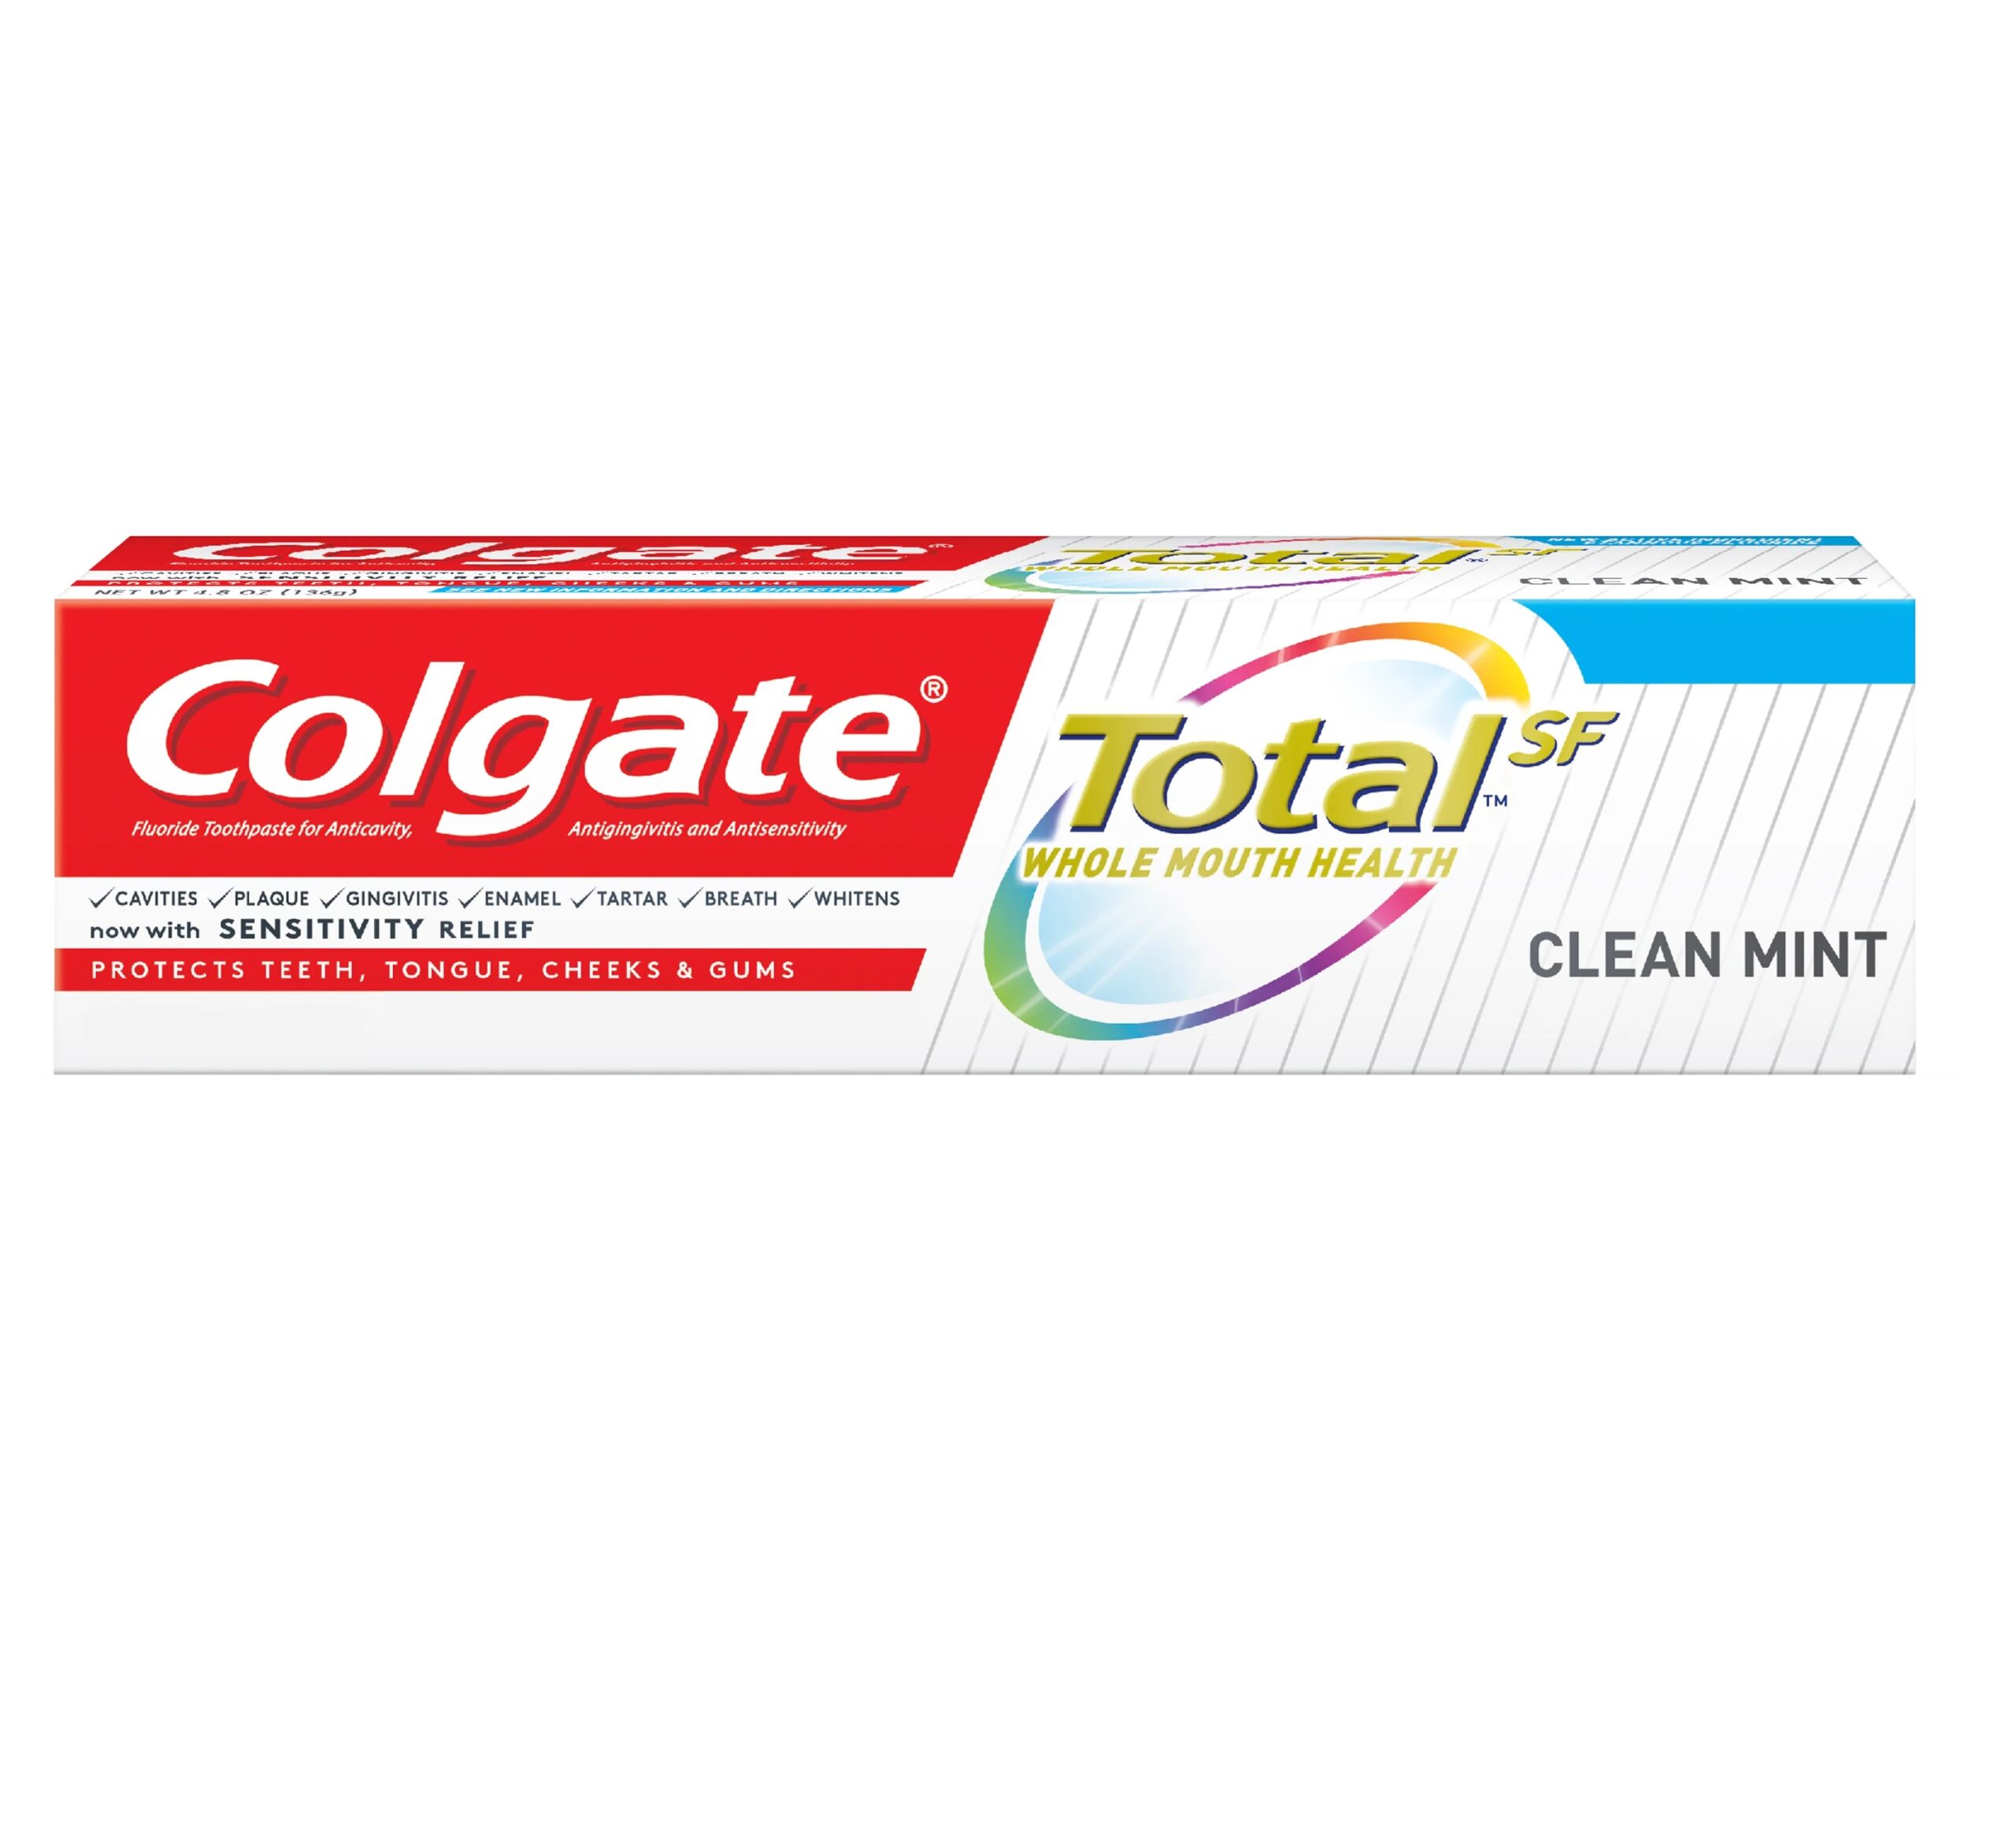 Colgate Total Spearmint Toothpaste 136G